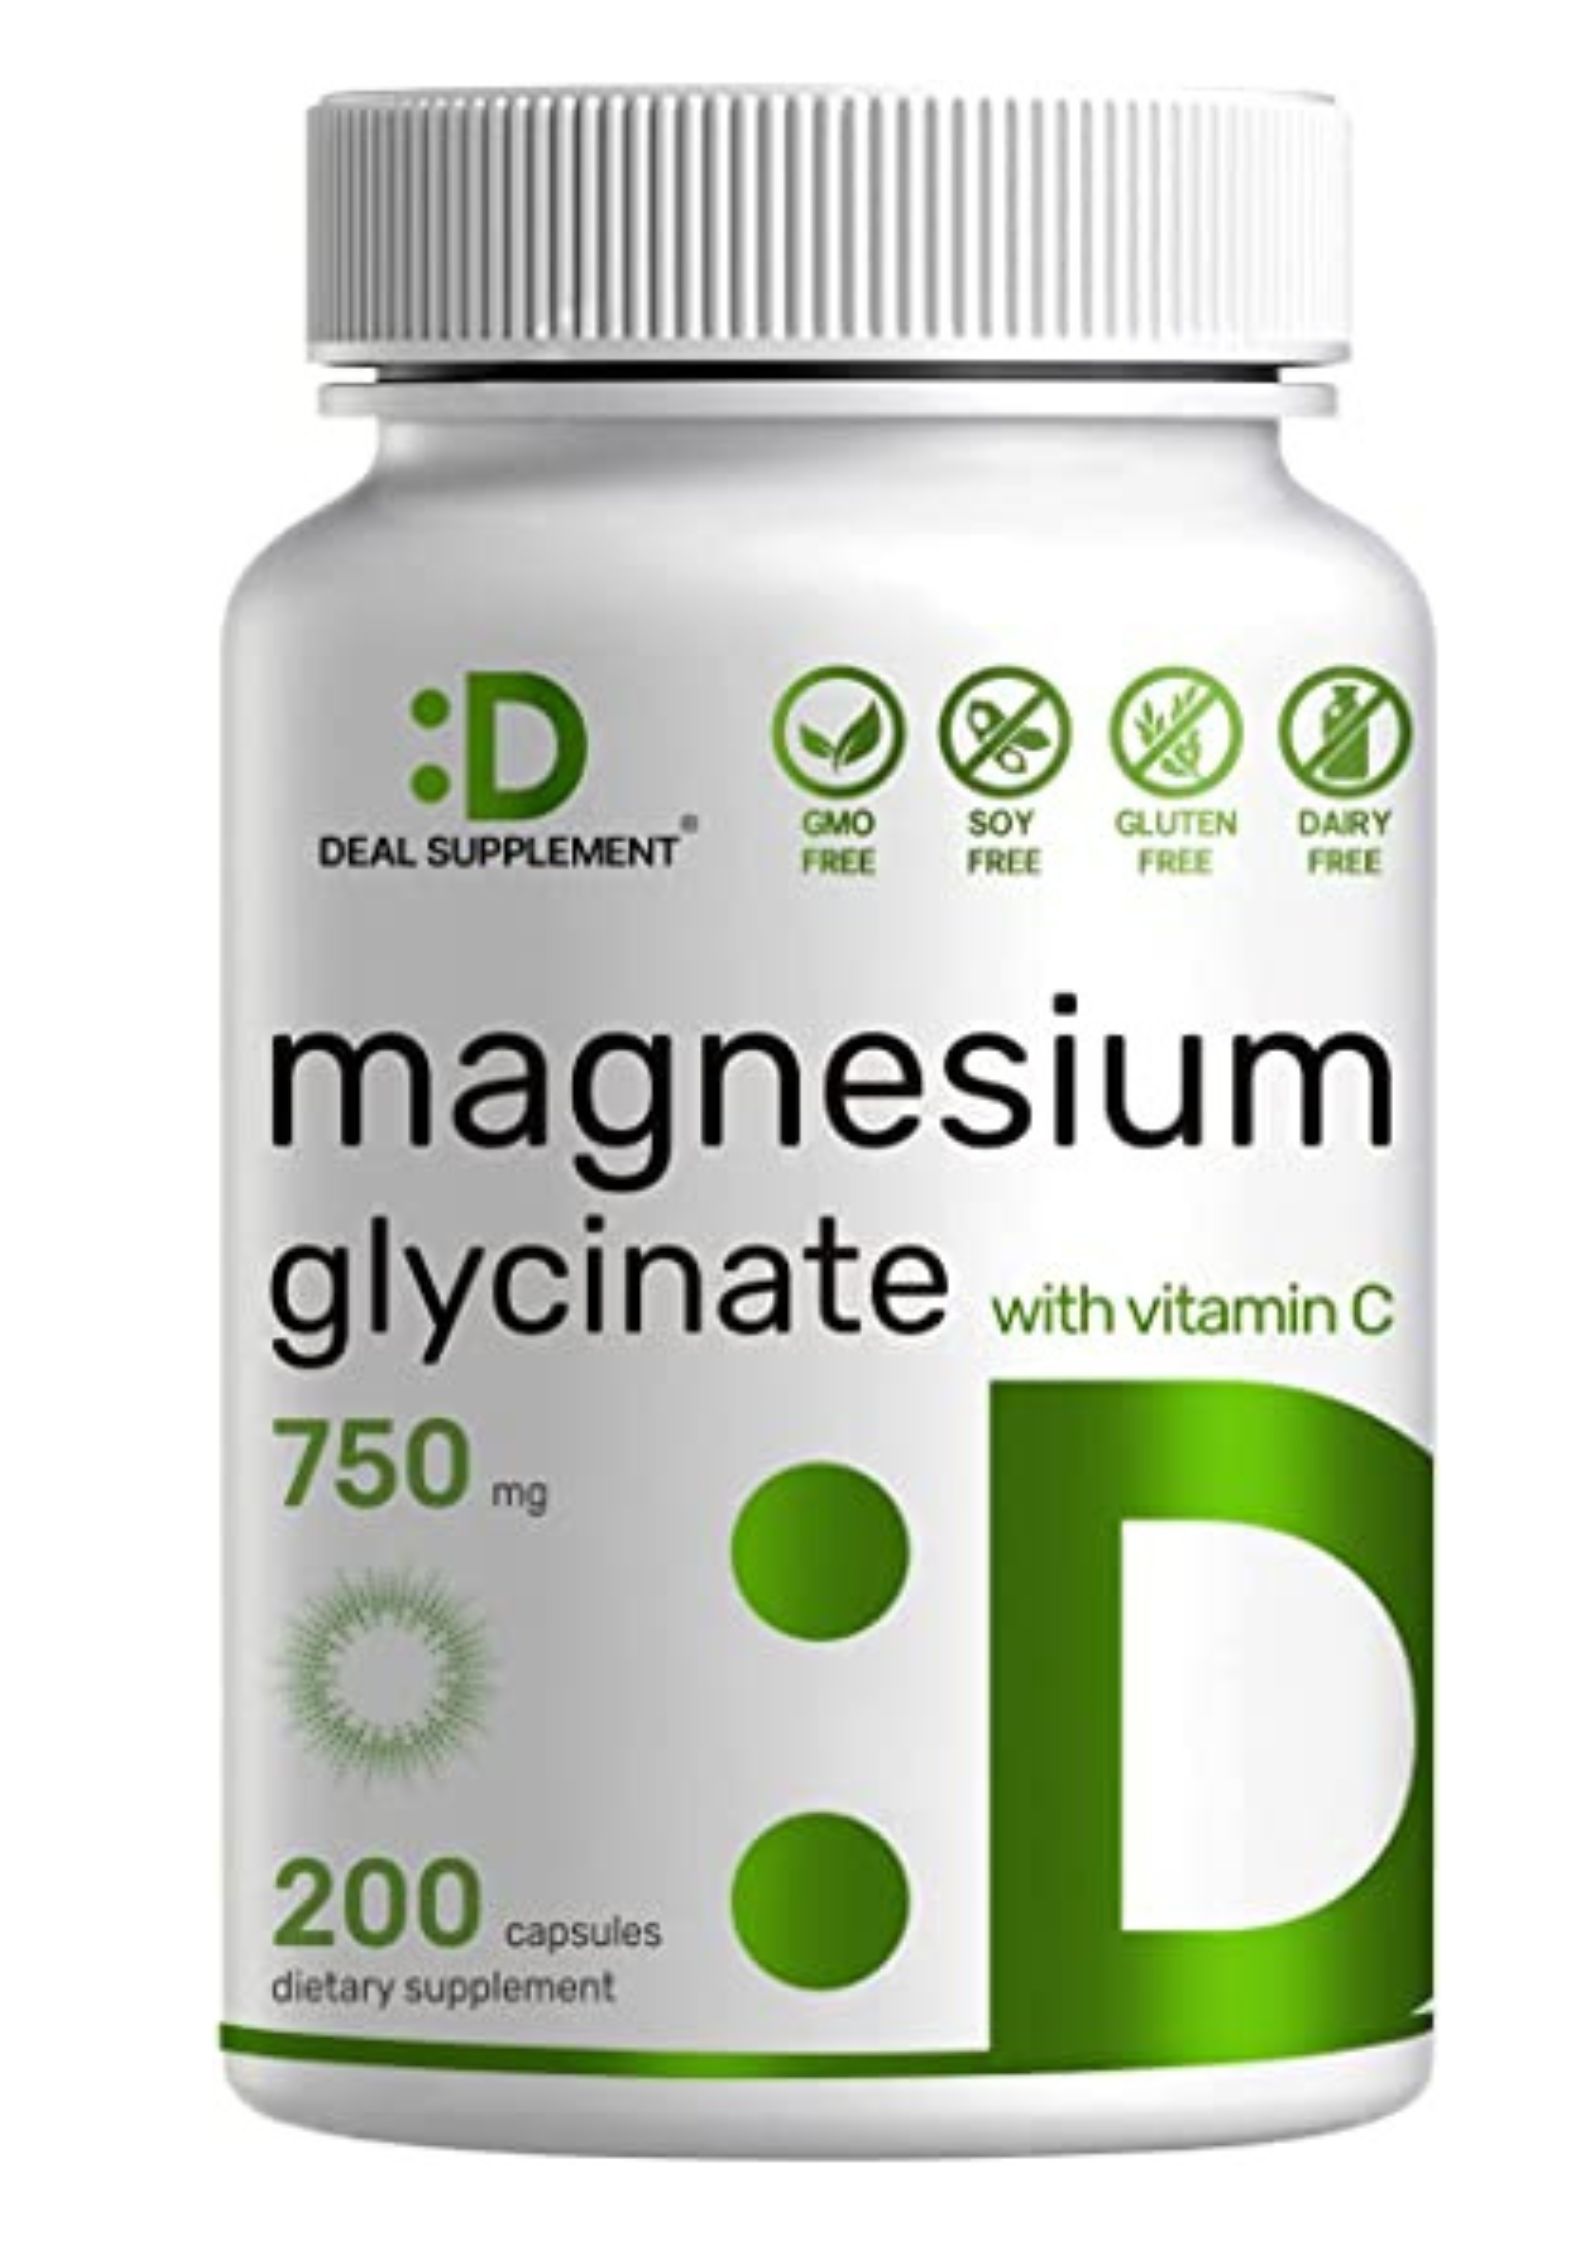 Deal Supplement Magnesium Glycinate 750mg With Vitamin C